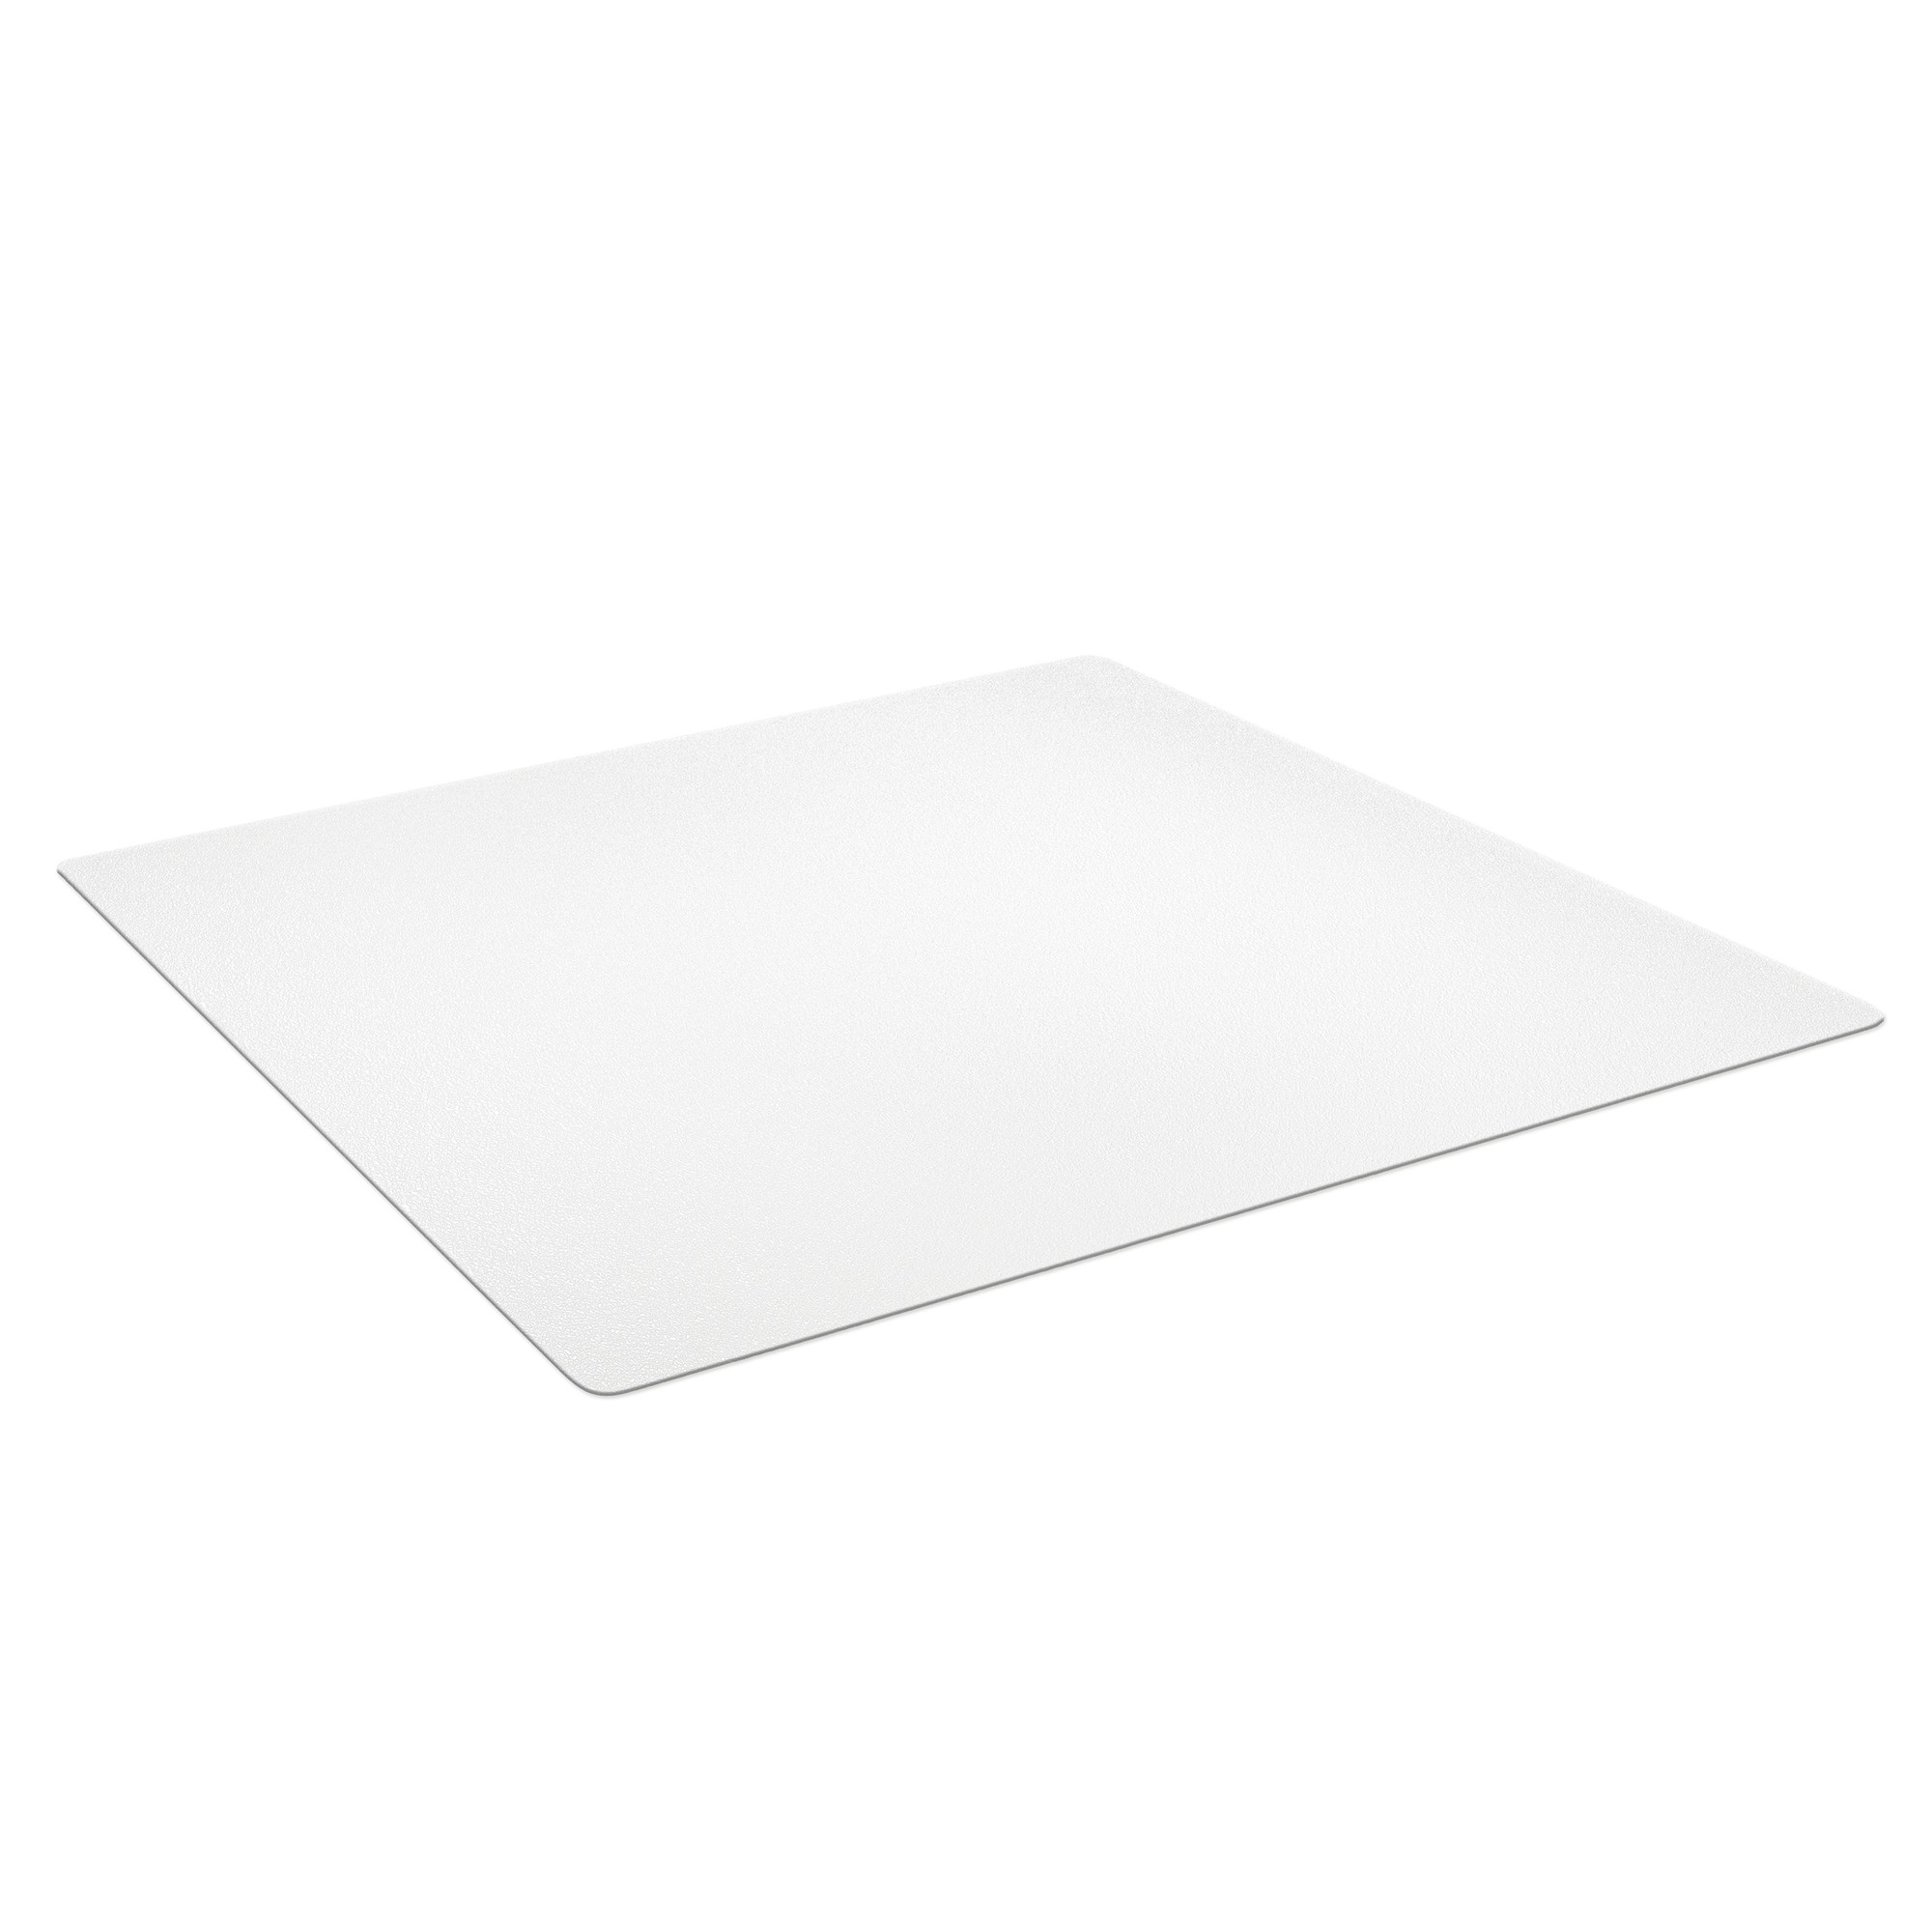 Aleco ES Robbins, Chair Mat for Light Use on HF, 46Inchx60Inch, Length 60 in, Width 46 in, Material Vinyl, Model 131829